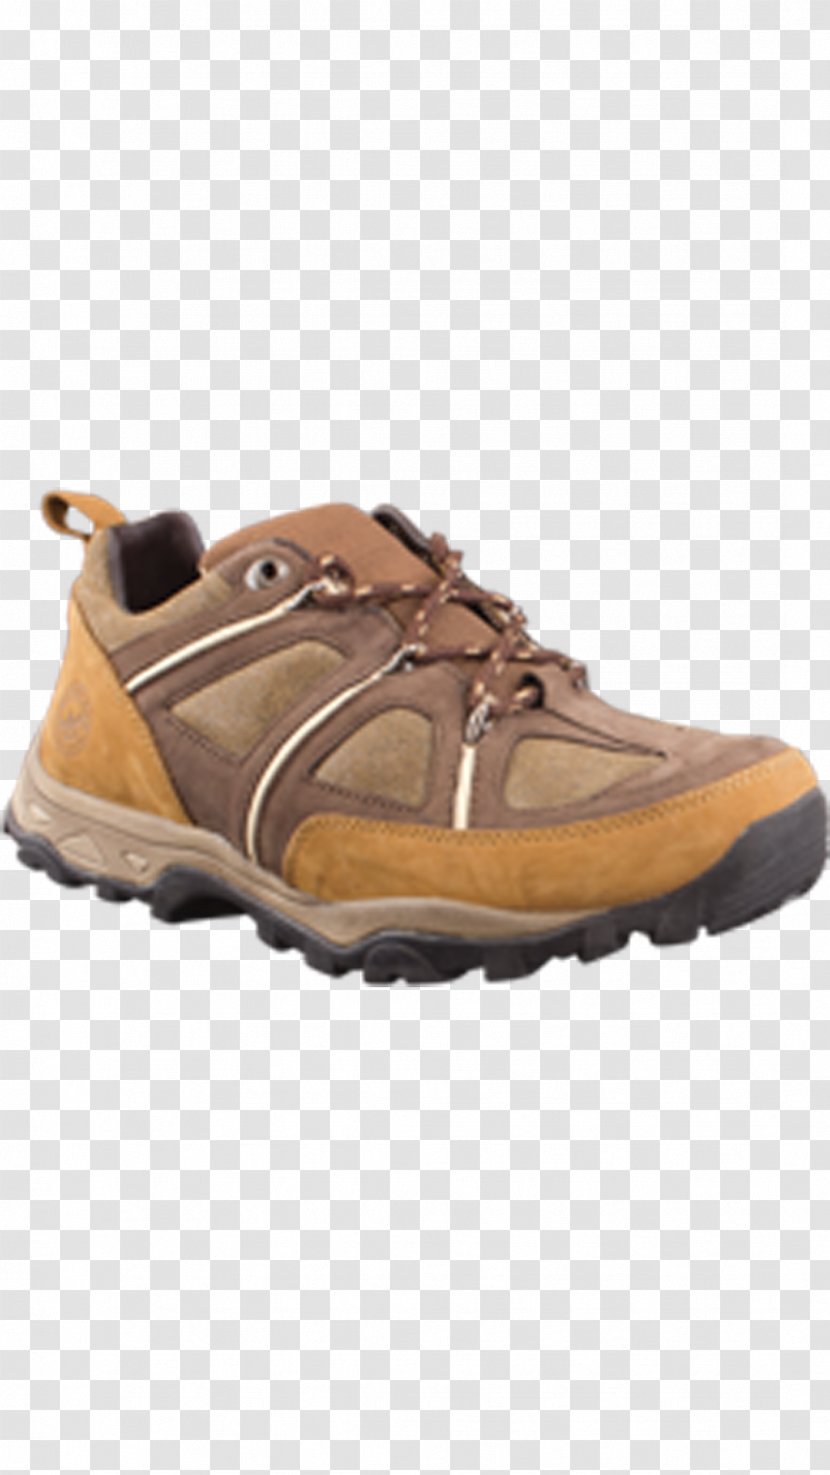 Suede Shoe Hiking Boot Cross-training Walking - Outdoor - United Kingdom Transparent PNG